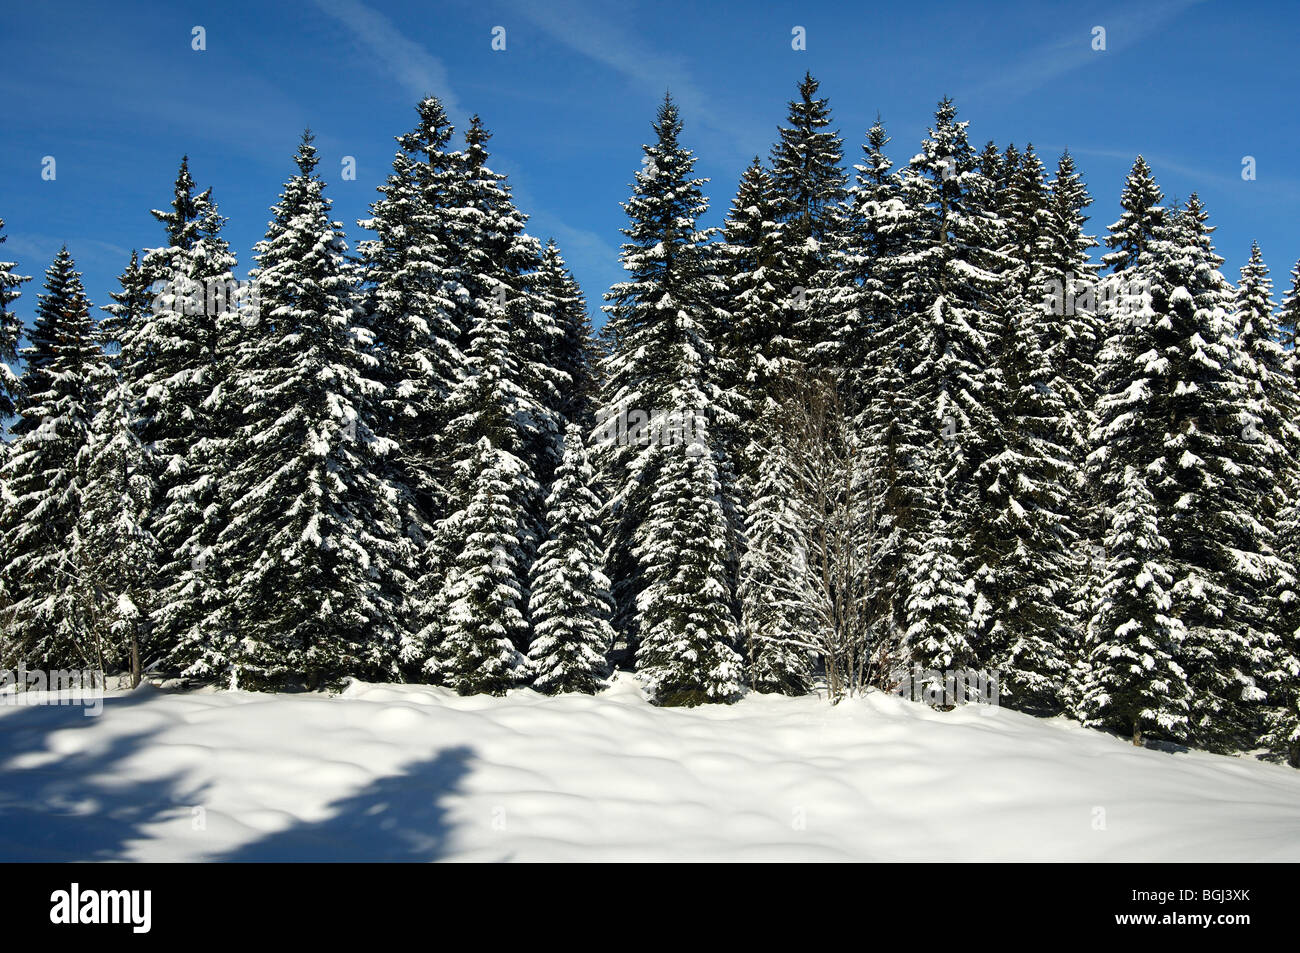 Winter landscape with snow-covered forest in the Jura region, St. Cergue, Switzerland Stock Photo